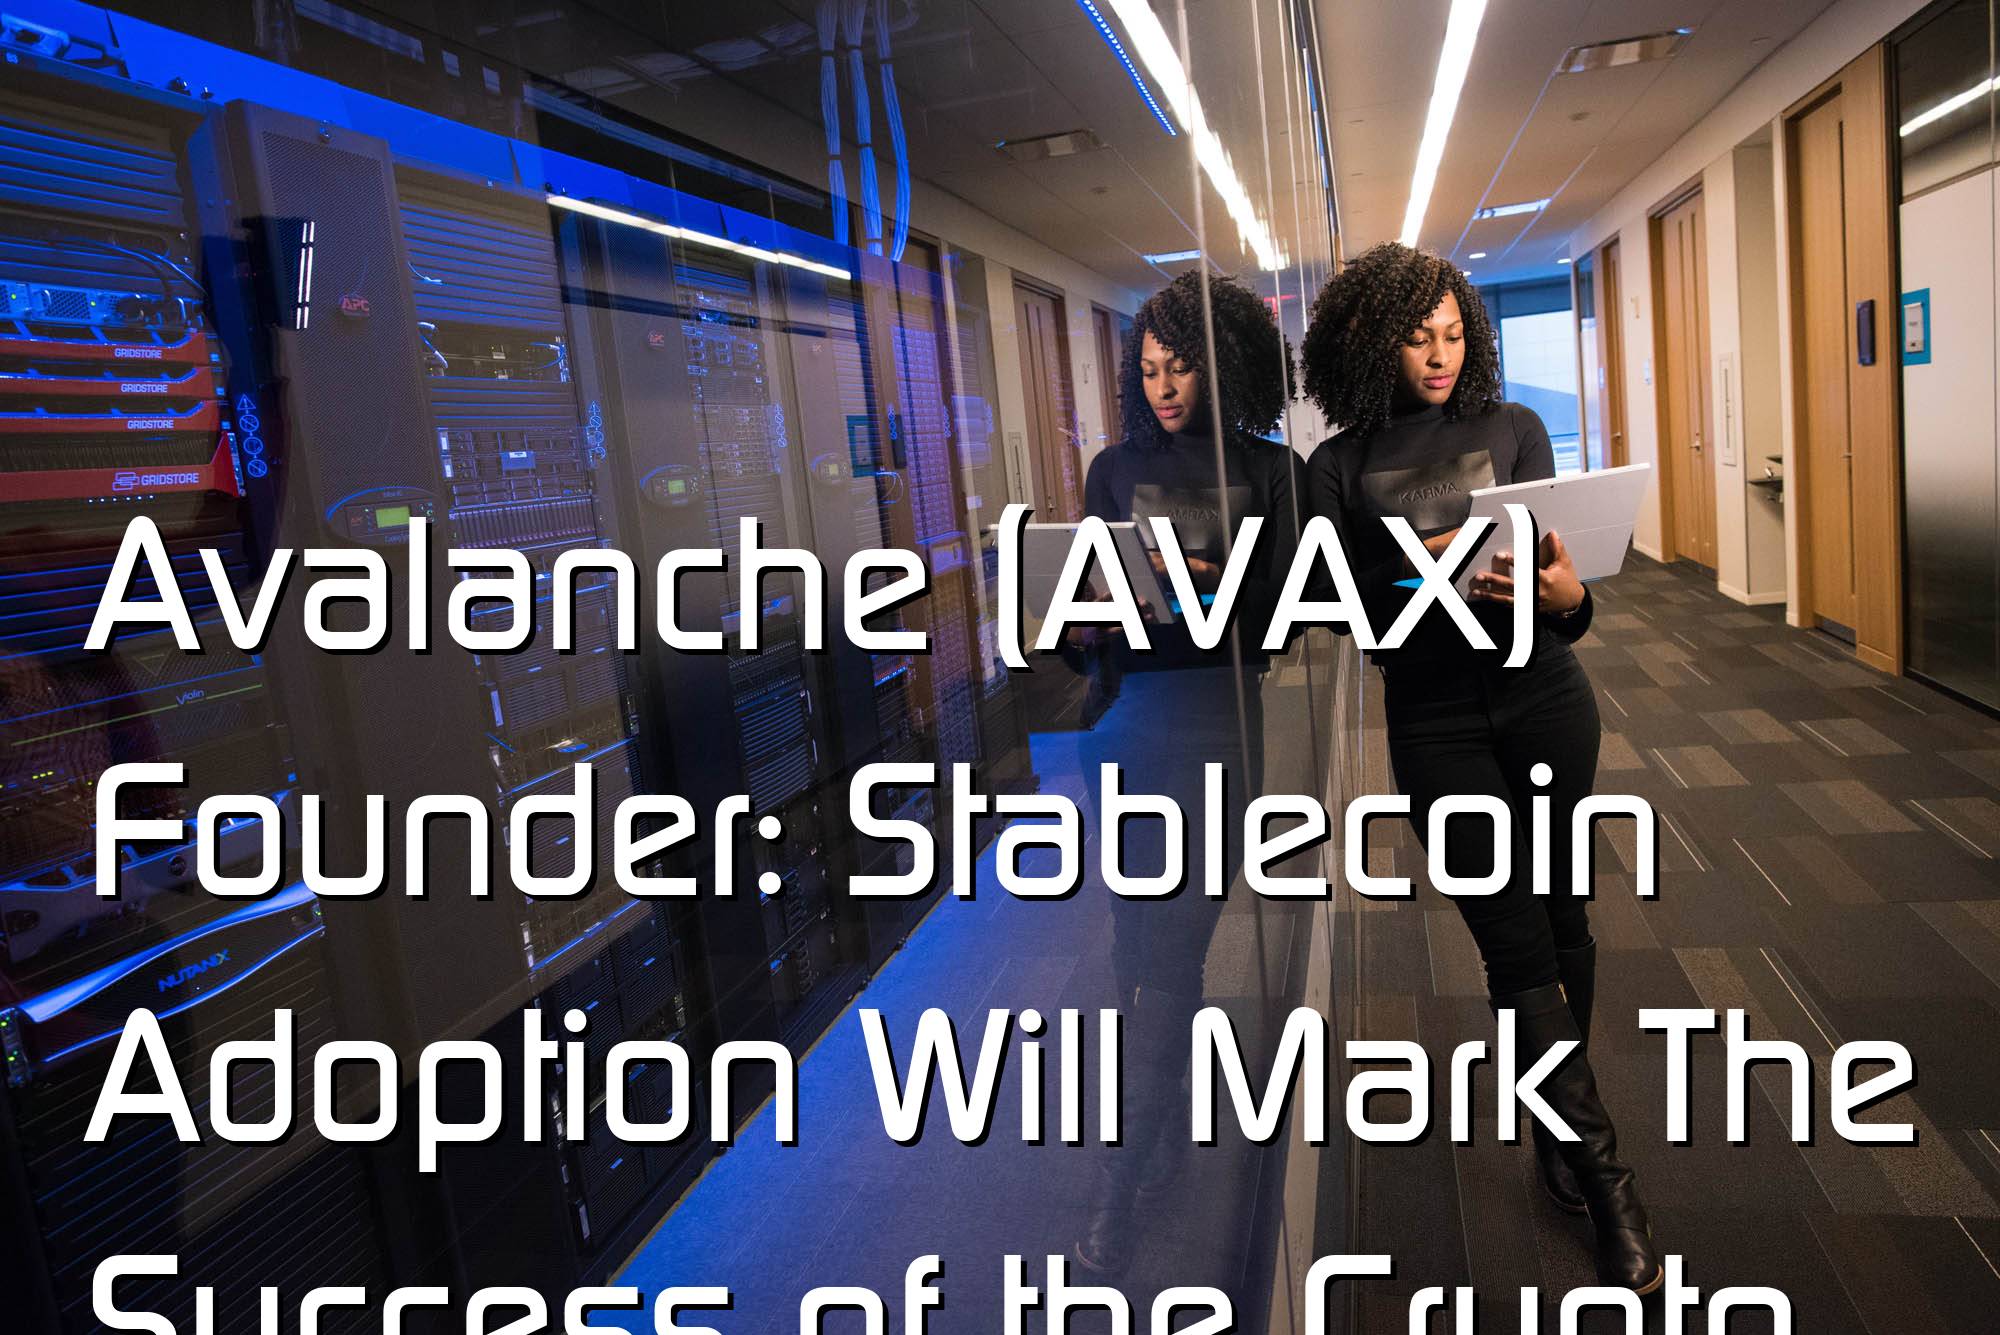 @$61159.47 Avalanche (AVAX) Founder: Stablecoin Adoption Will Mark The Success of the Crypto Industry